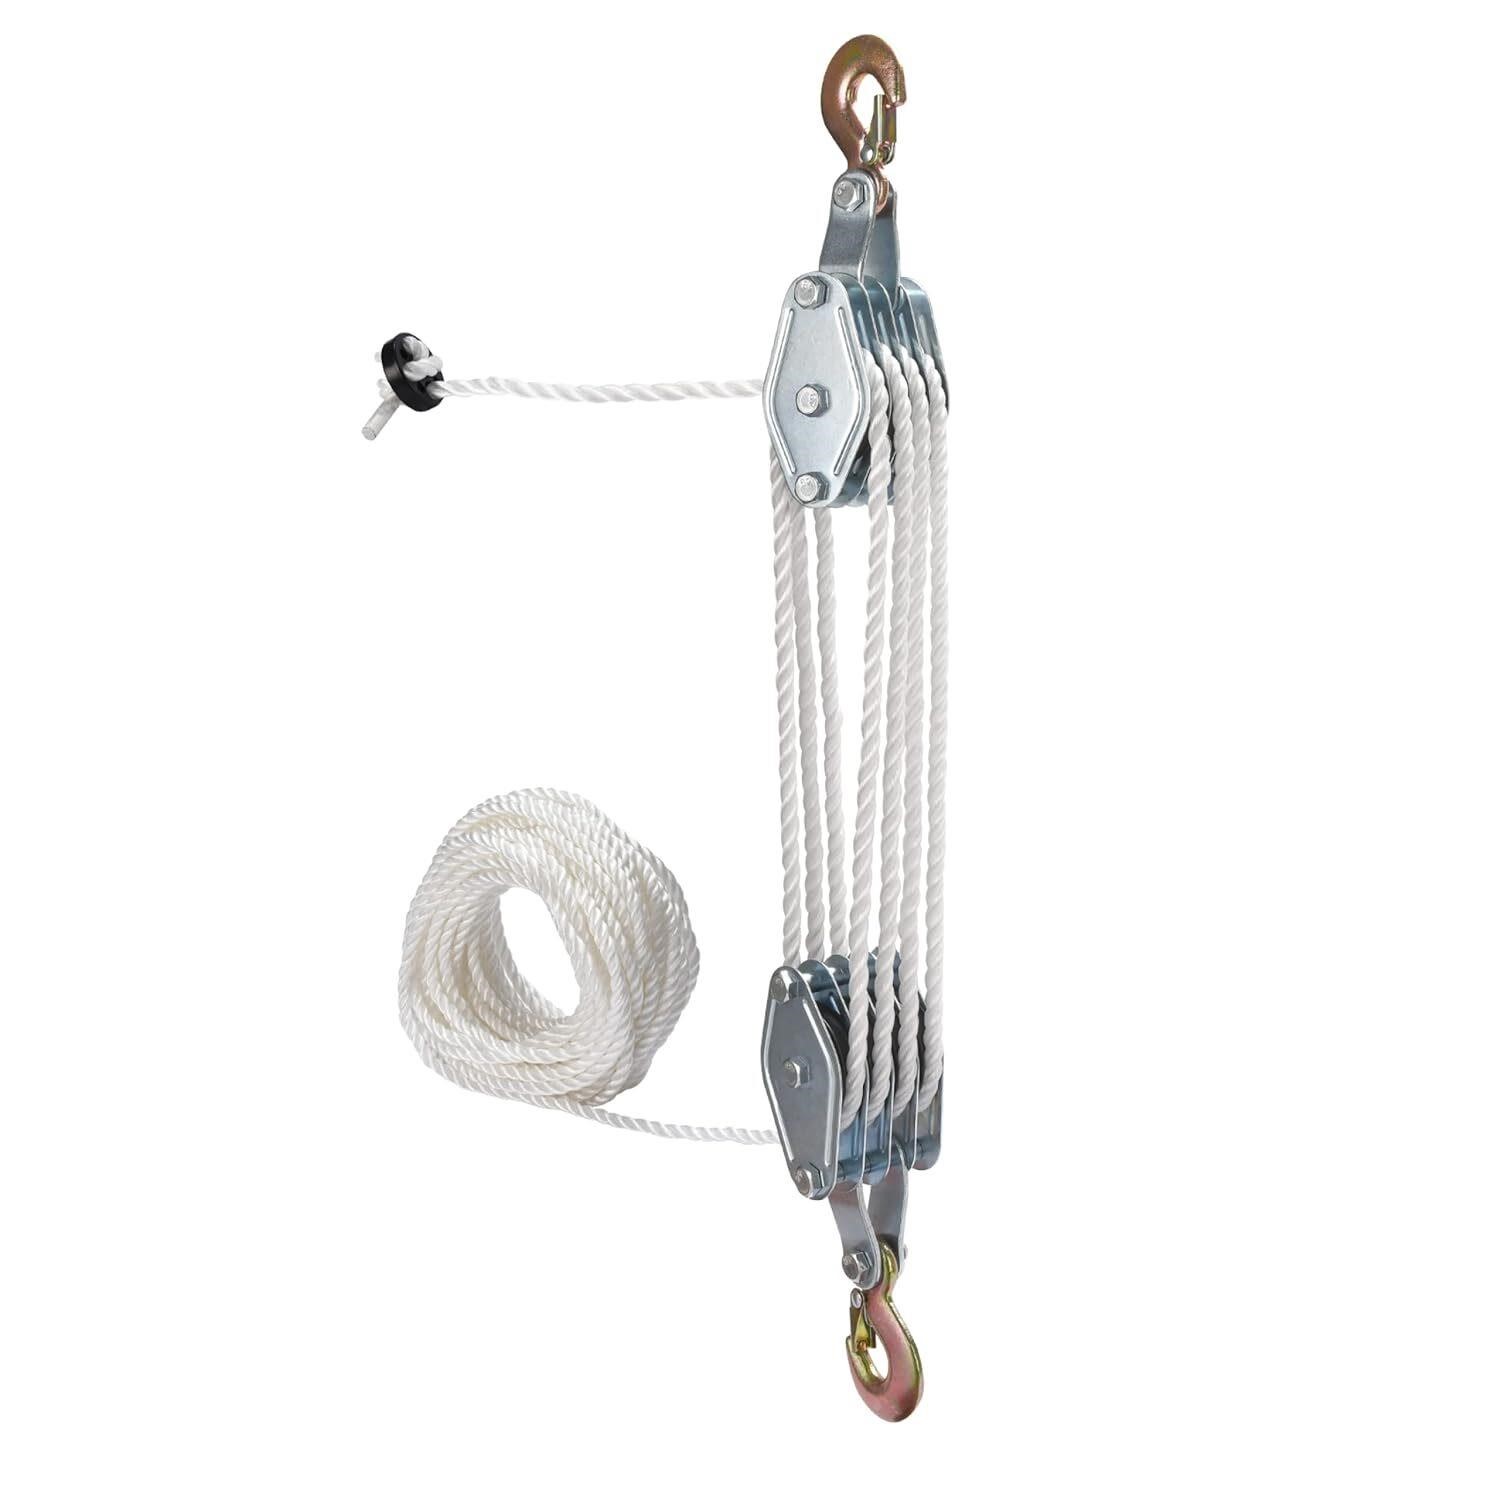 Block & Tackle Pulley System - Heavy Duty